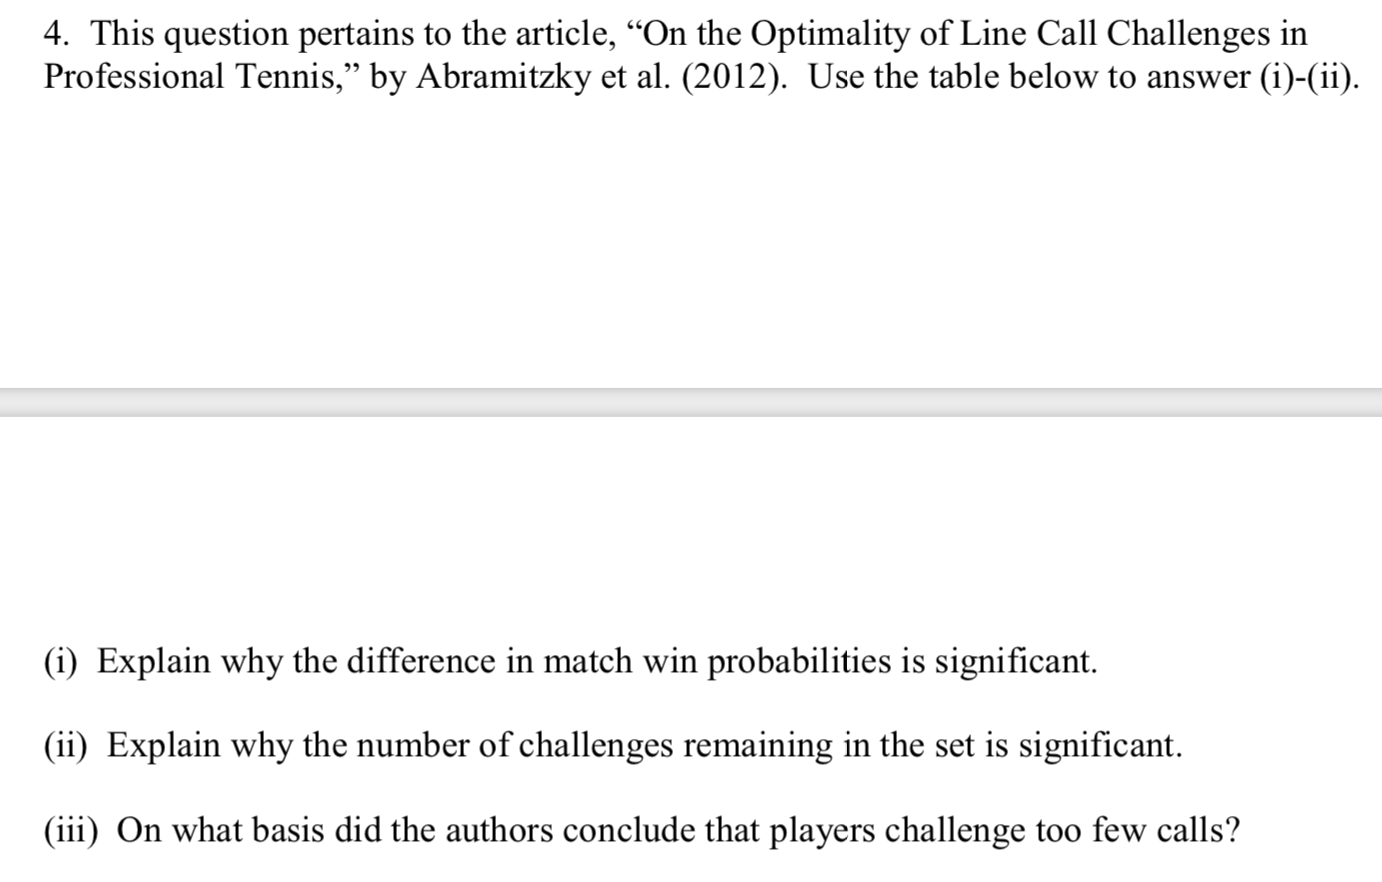 4. This question pertains to the article, “On the Optimality of Line Call Challenges in
Professional Tennis," by Abramitzky et al. (2012). Use the table below to answer (i)-(ii).
(i) Explain why the difference in match win probabilities is significant.
(ii) Explain why the number of challenges remaining in the set is significant.
(iii) On what basis did the authors conclude that players challenge too few calls?
